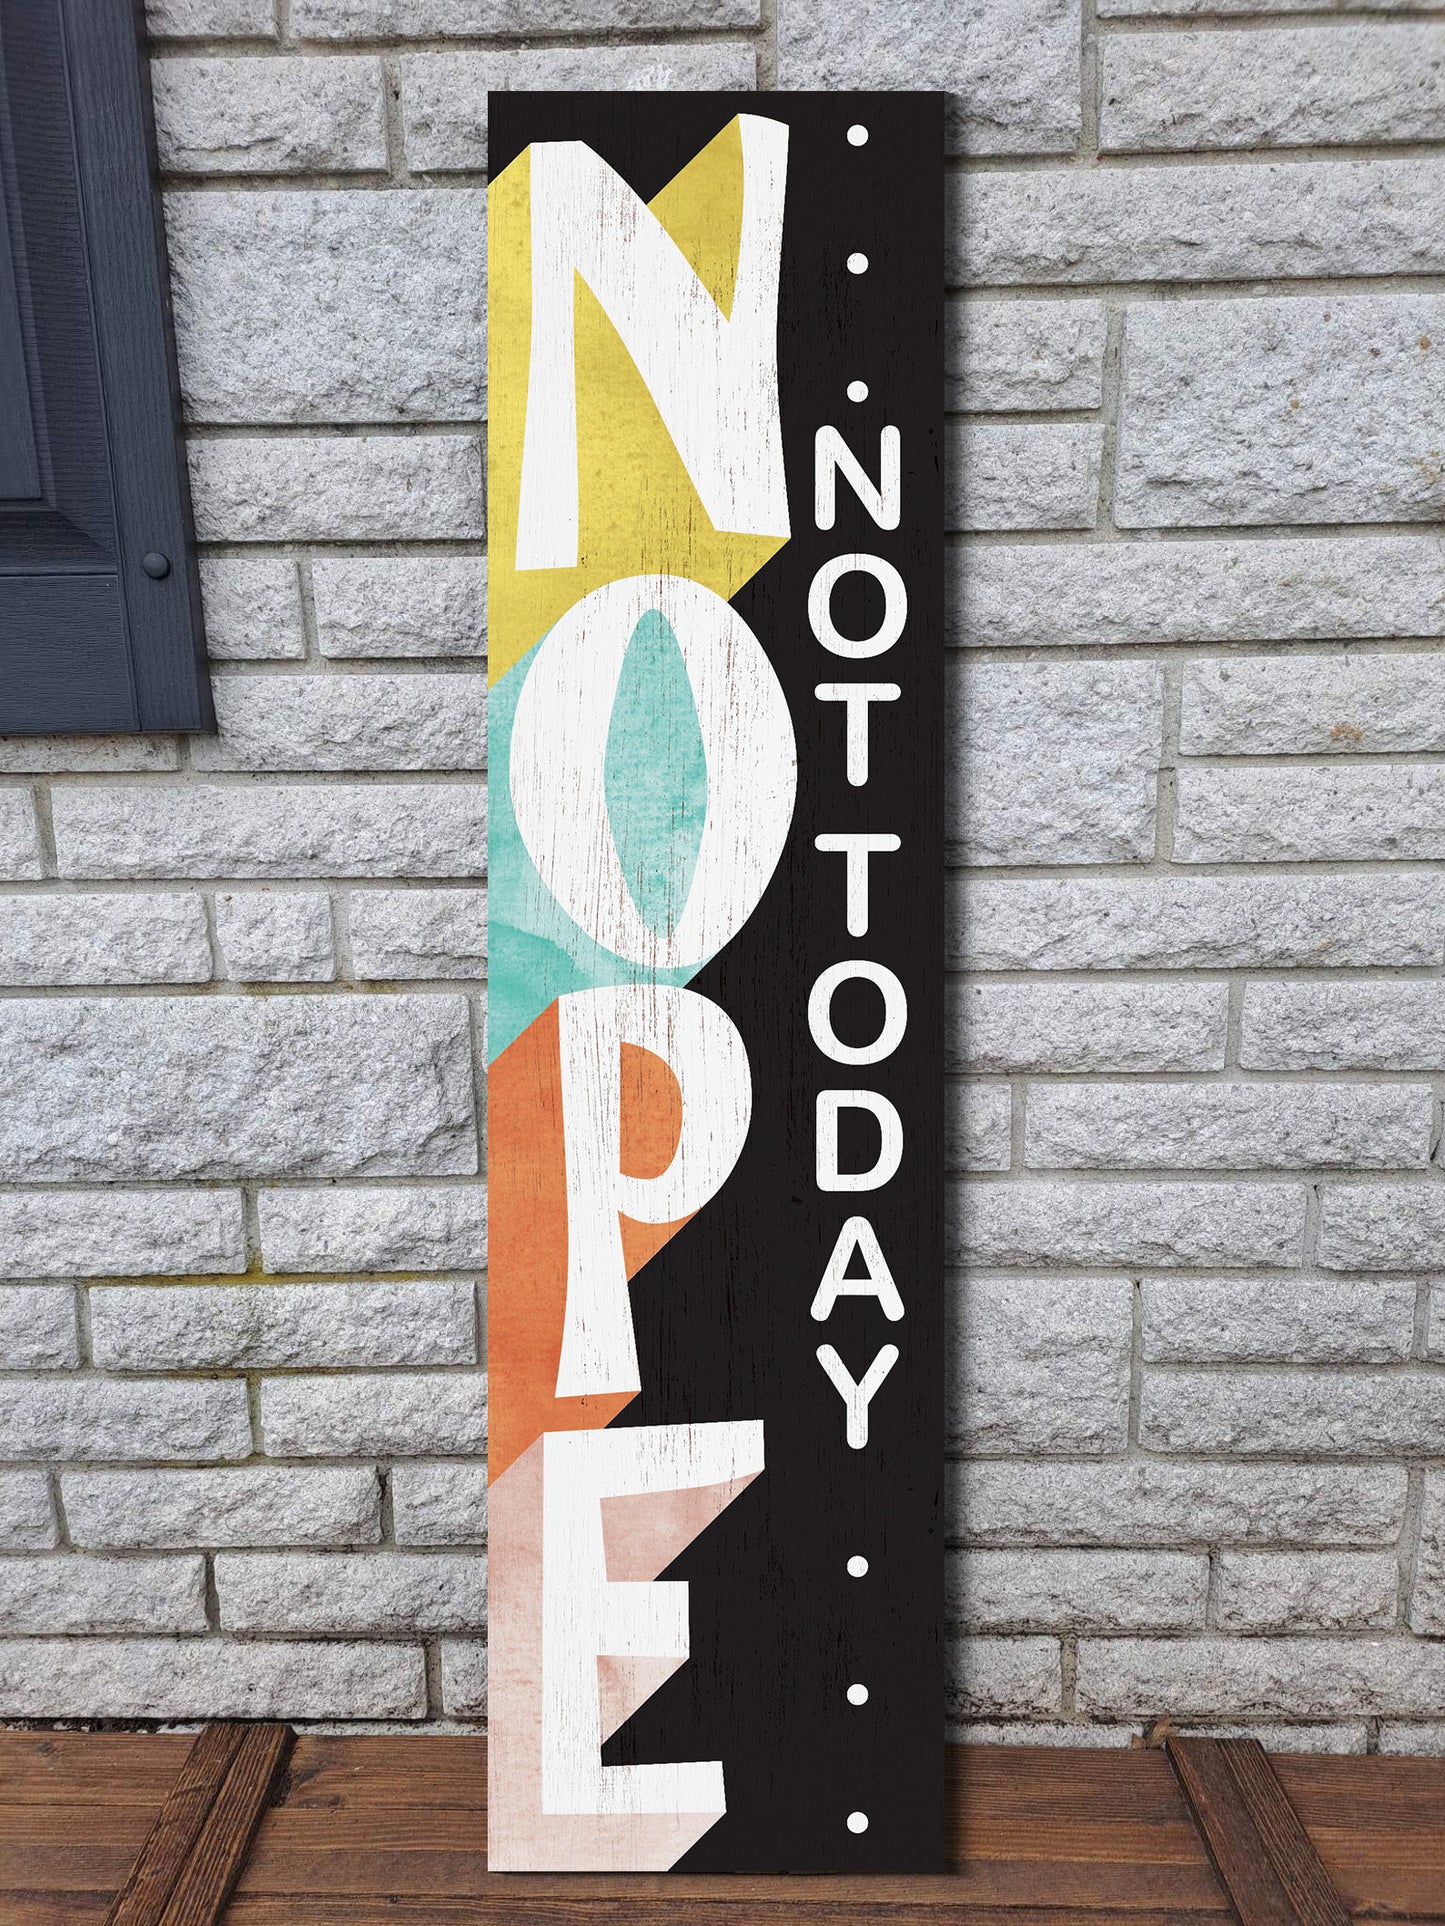 Handmade Wooden "Nope Not Today" Porch Sign for Indoor/Outdoor Use, Vertical Wall Sign for Home Decorations